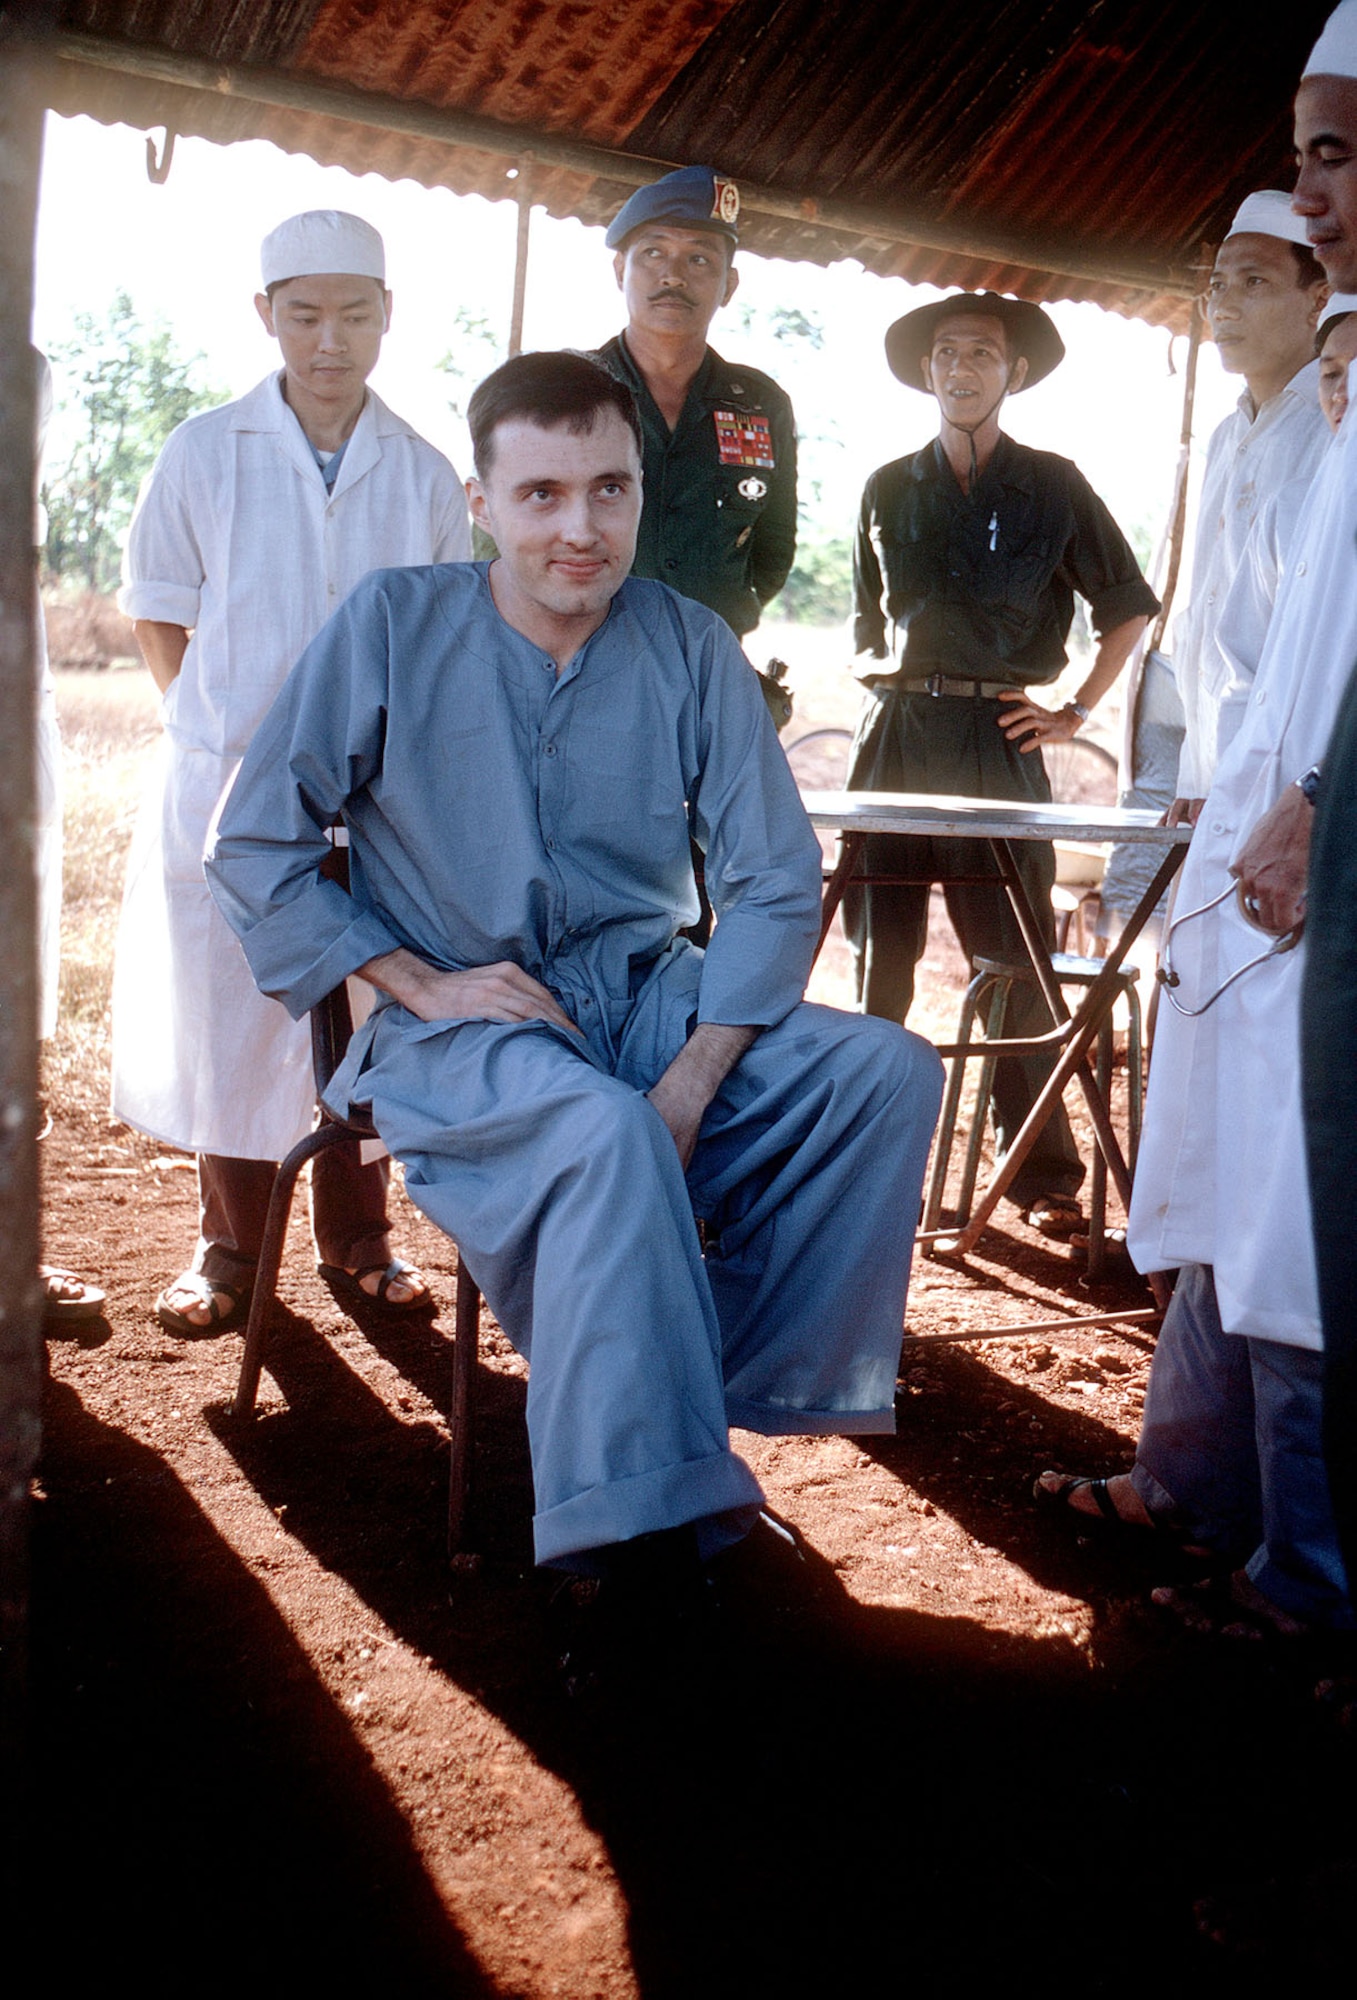 Twenty-seven Americans, most of whom had been held in South Vietnam by the Viet Cong, were released at Loc Ninh and left Vietnam from Saigon. Here, USAF Capt. David Baker, an injured POW, awaits release. (U.S. Air Force photo)